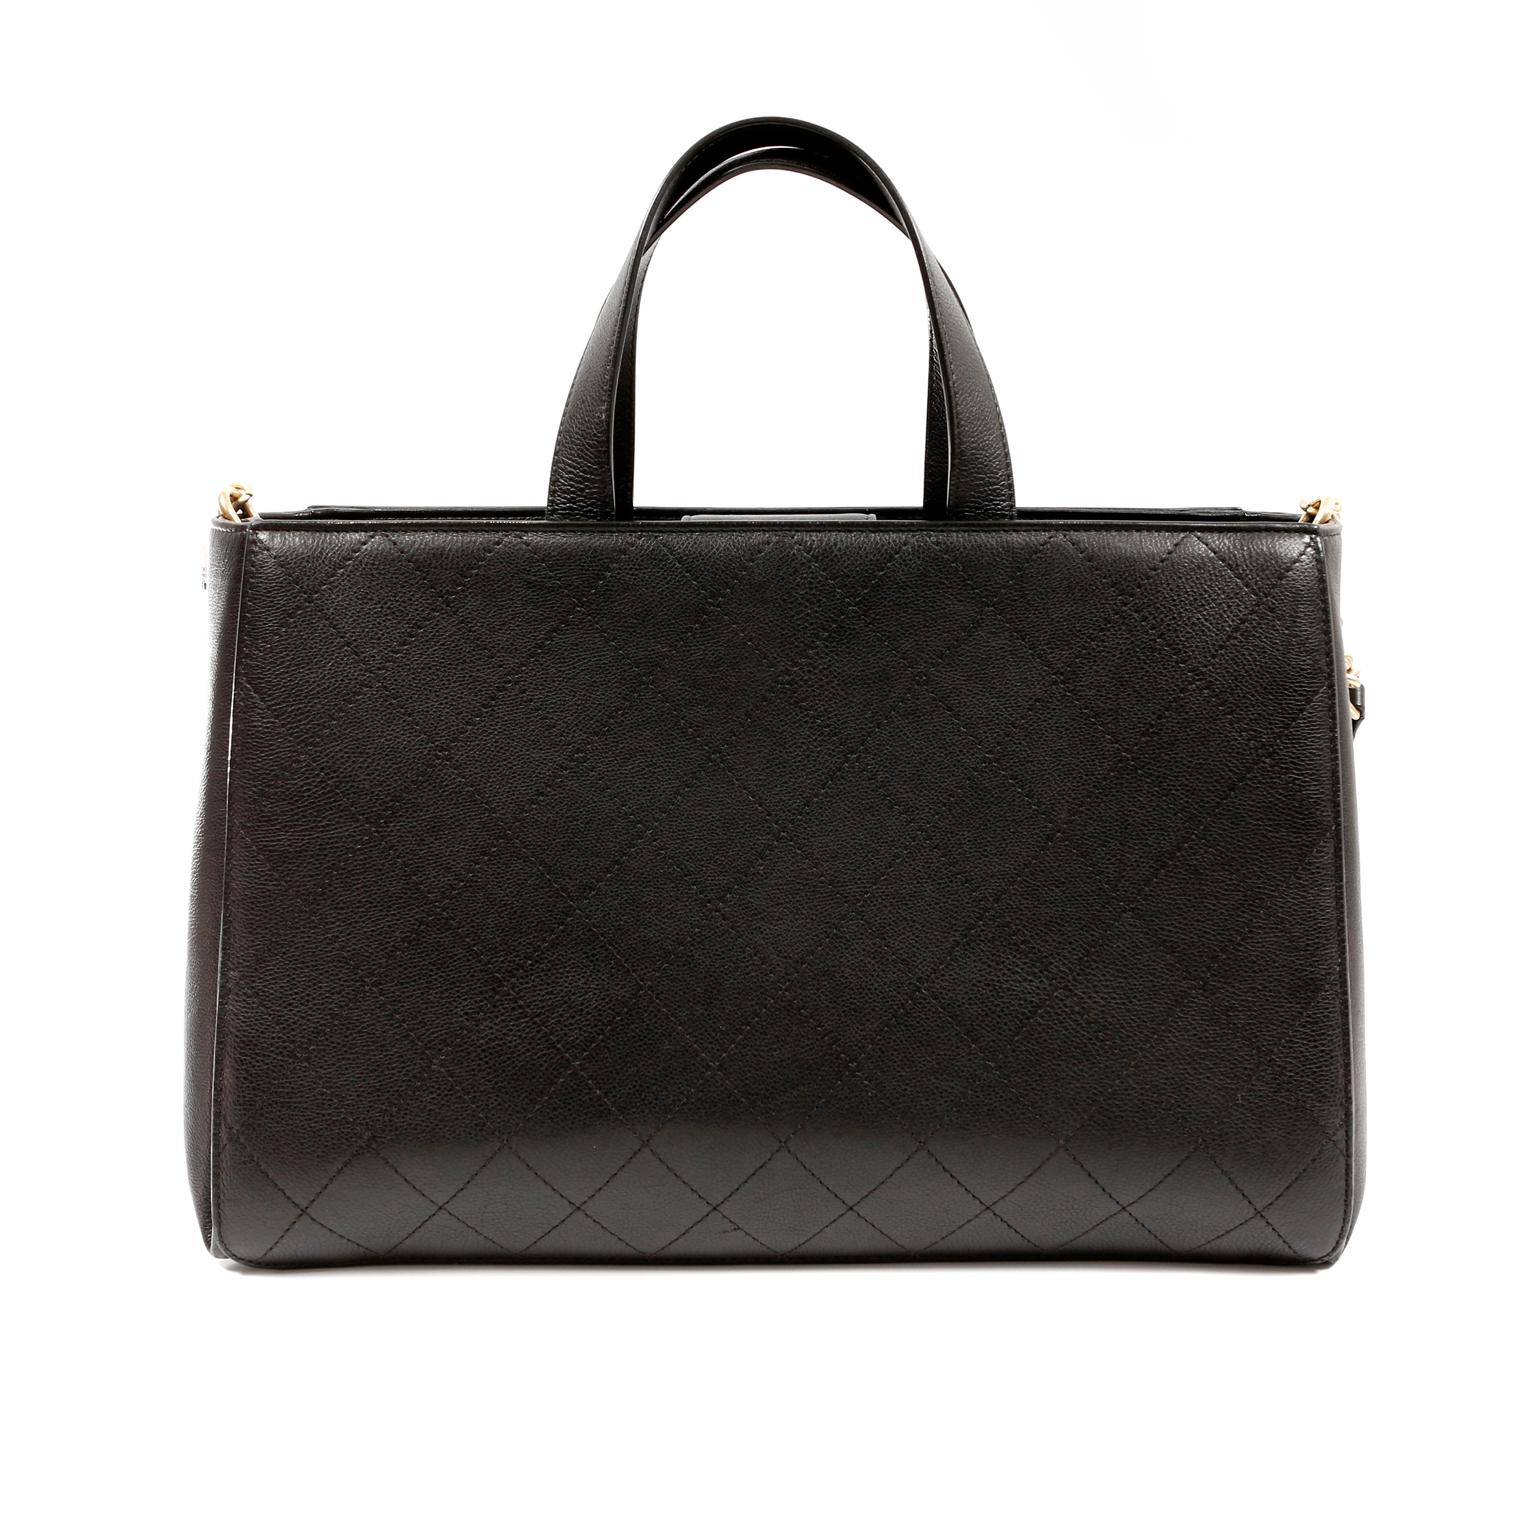 This authentic Chanel Black Calfskin Straight Lines Tote is in excellent condition.  The silhouette is highly sophisticated and works well for most any purpose.
Black calfskin tote has topstitched signature Chanel diamond pattern.  Exterior front